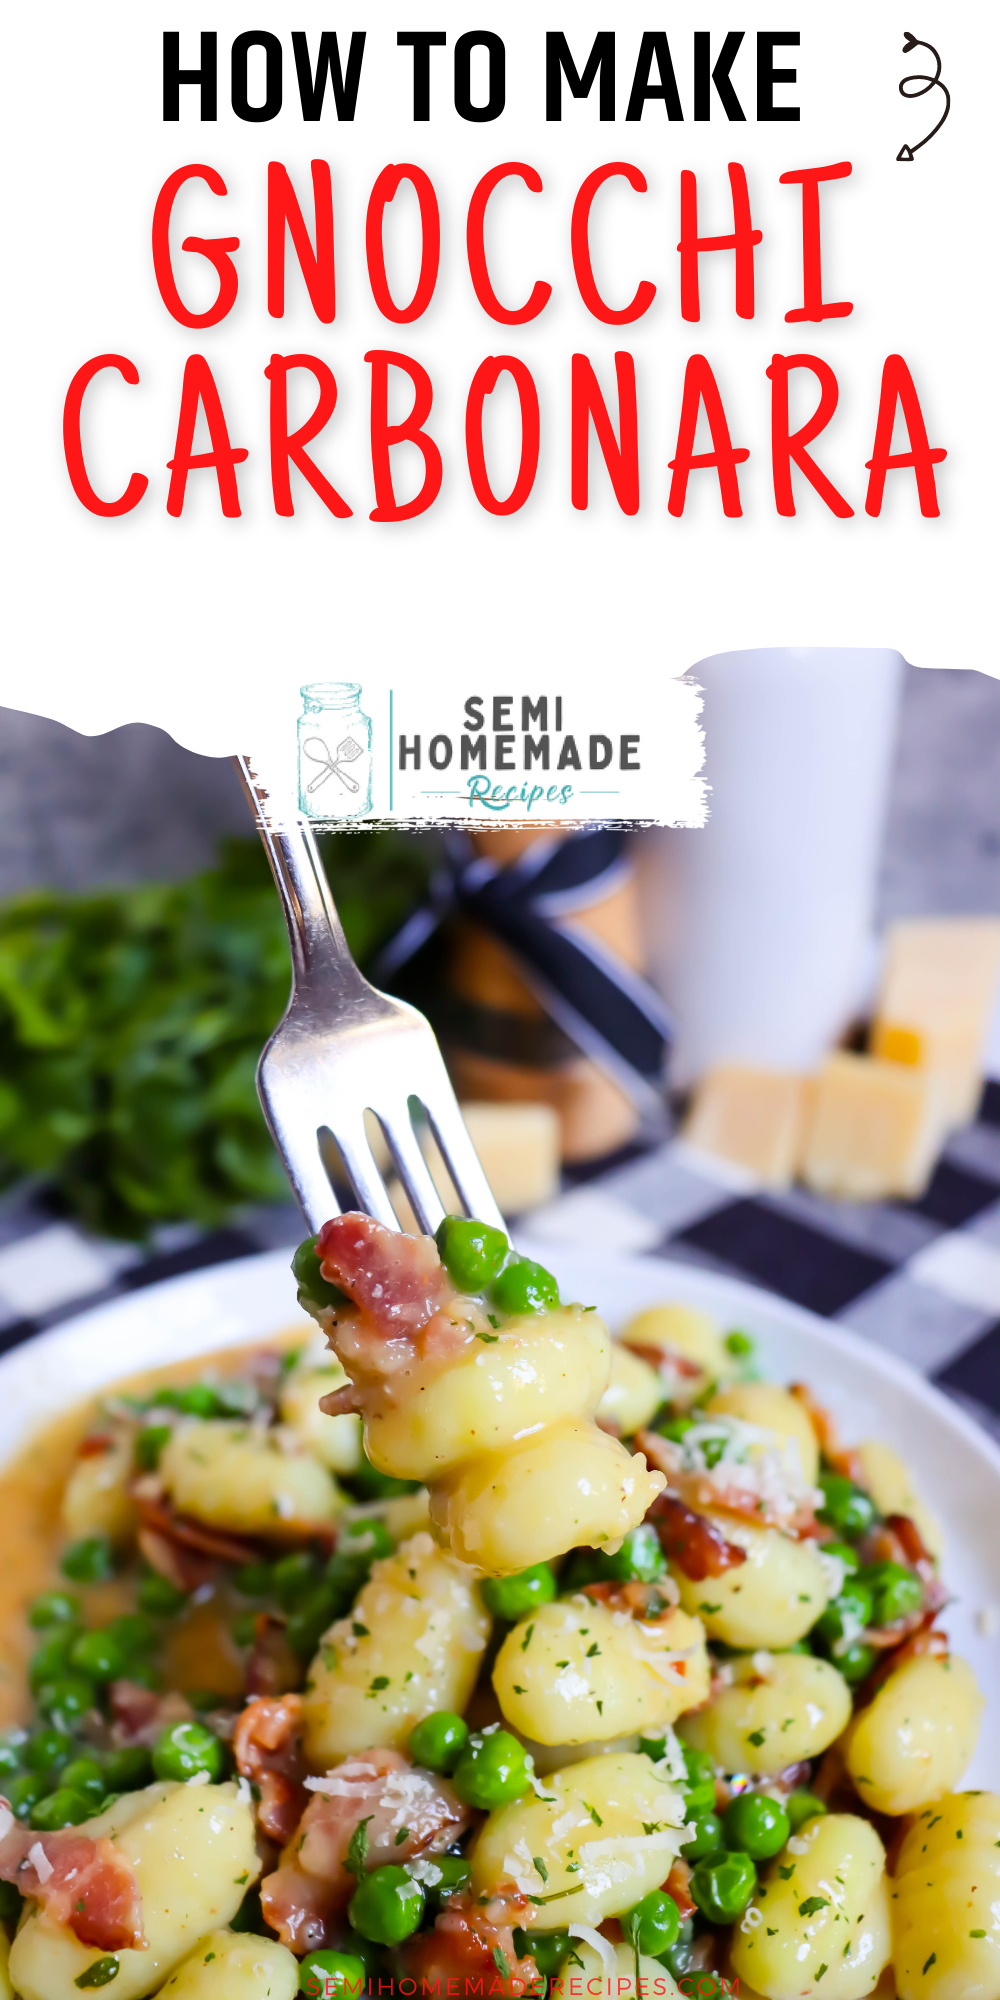 Gnocchi Carbonara - easy dinner recipe with soft gnocchi, bacon and cheese. 